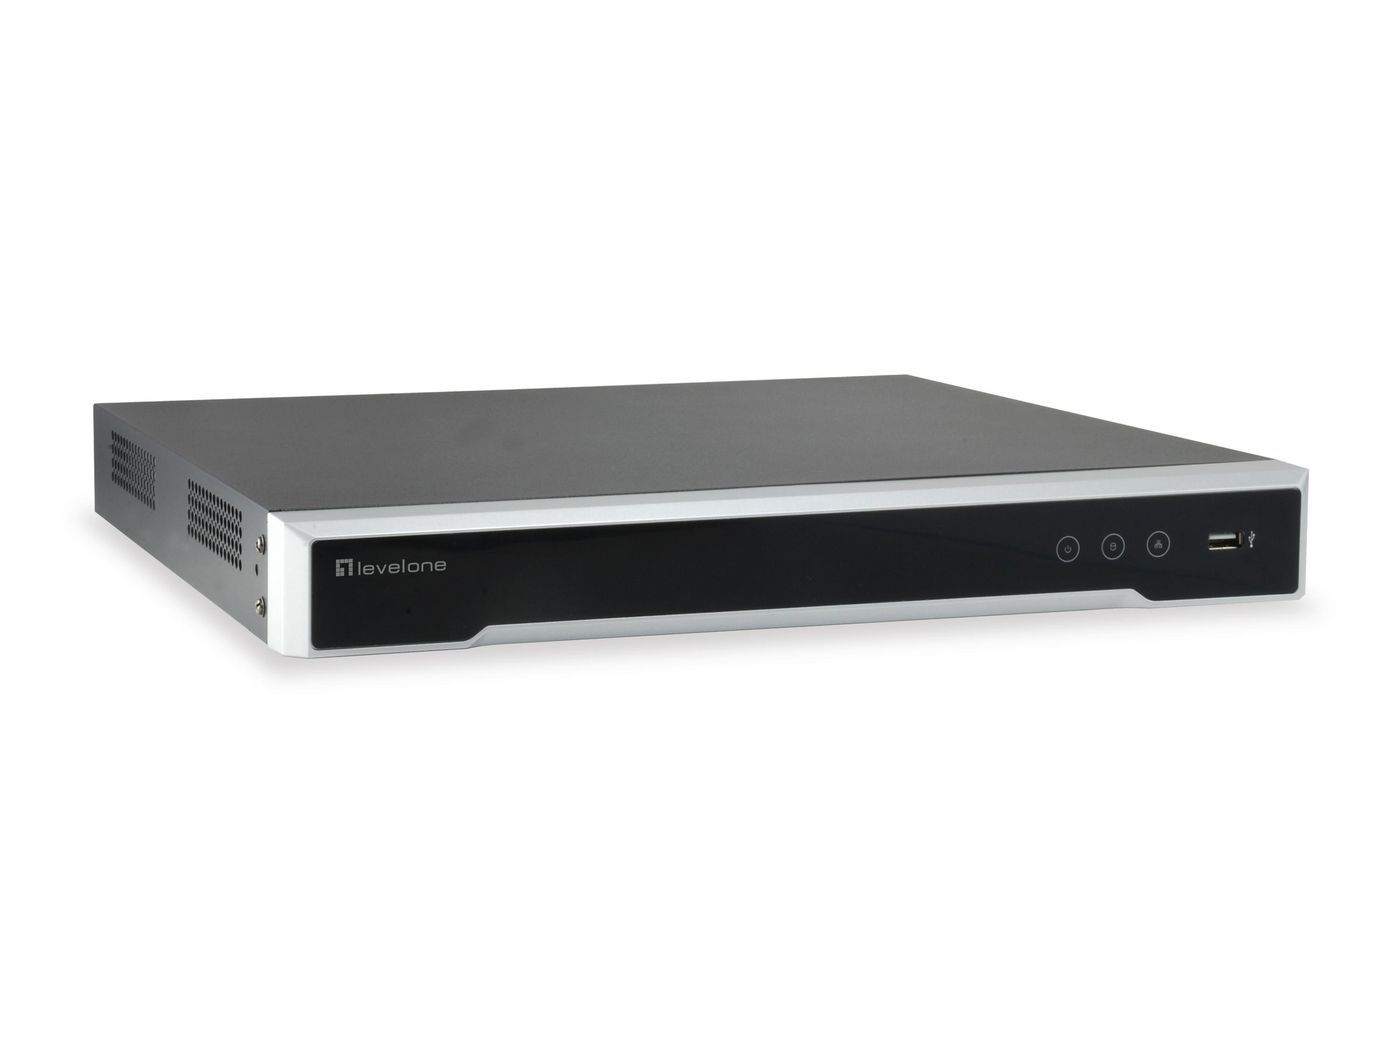 LevelOne NVR-0508 8CH NVR 8-PORT POE IEEE 802.3A 